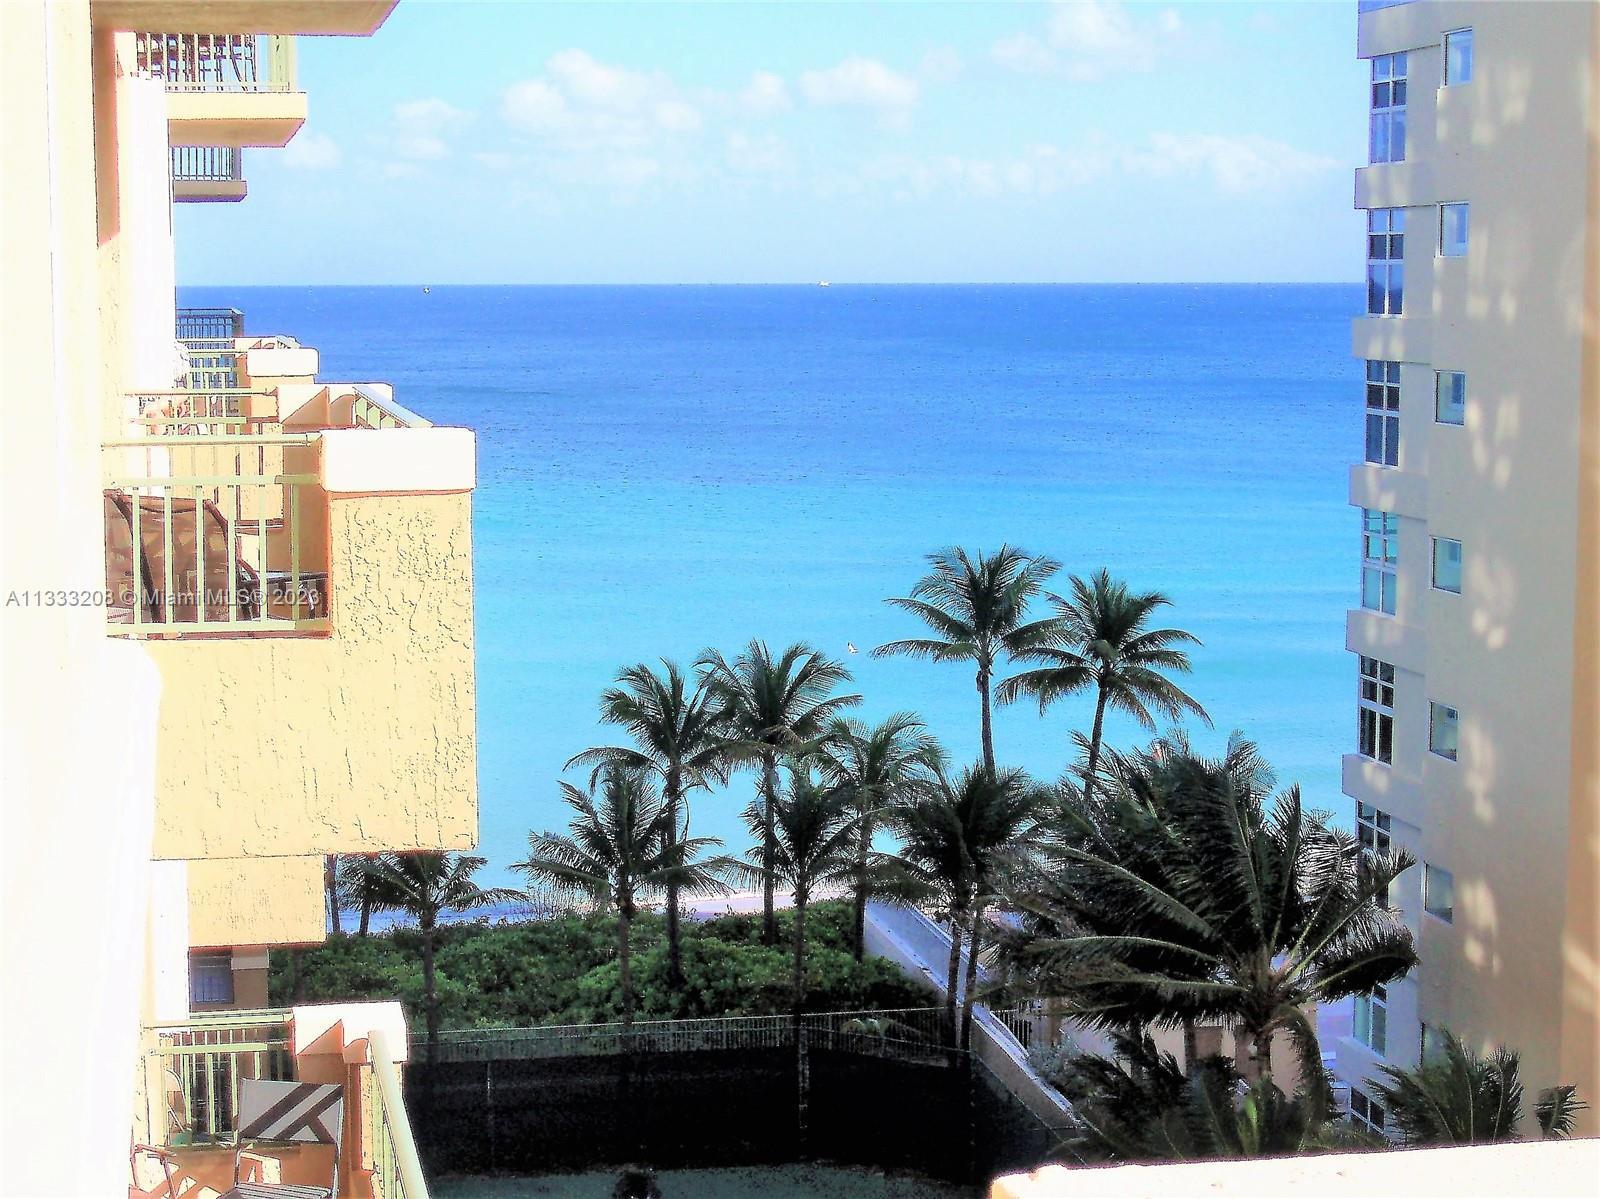 Here's your chance to own on the beach at 2080 Ocean Drive! Enjoy sun on the balcony in this spaciou